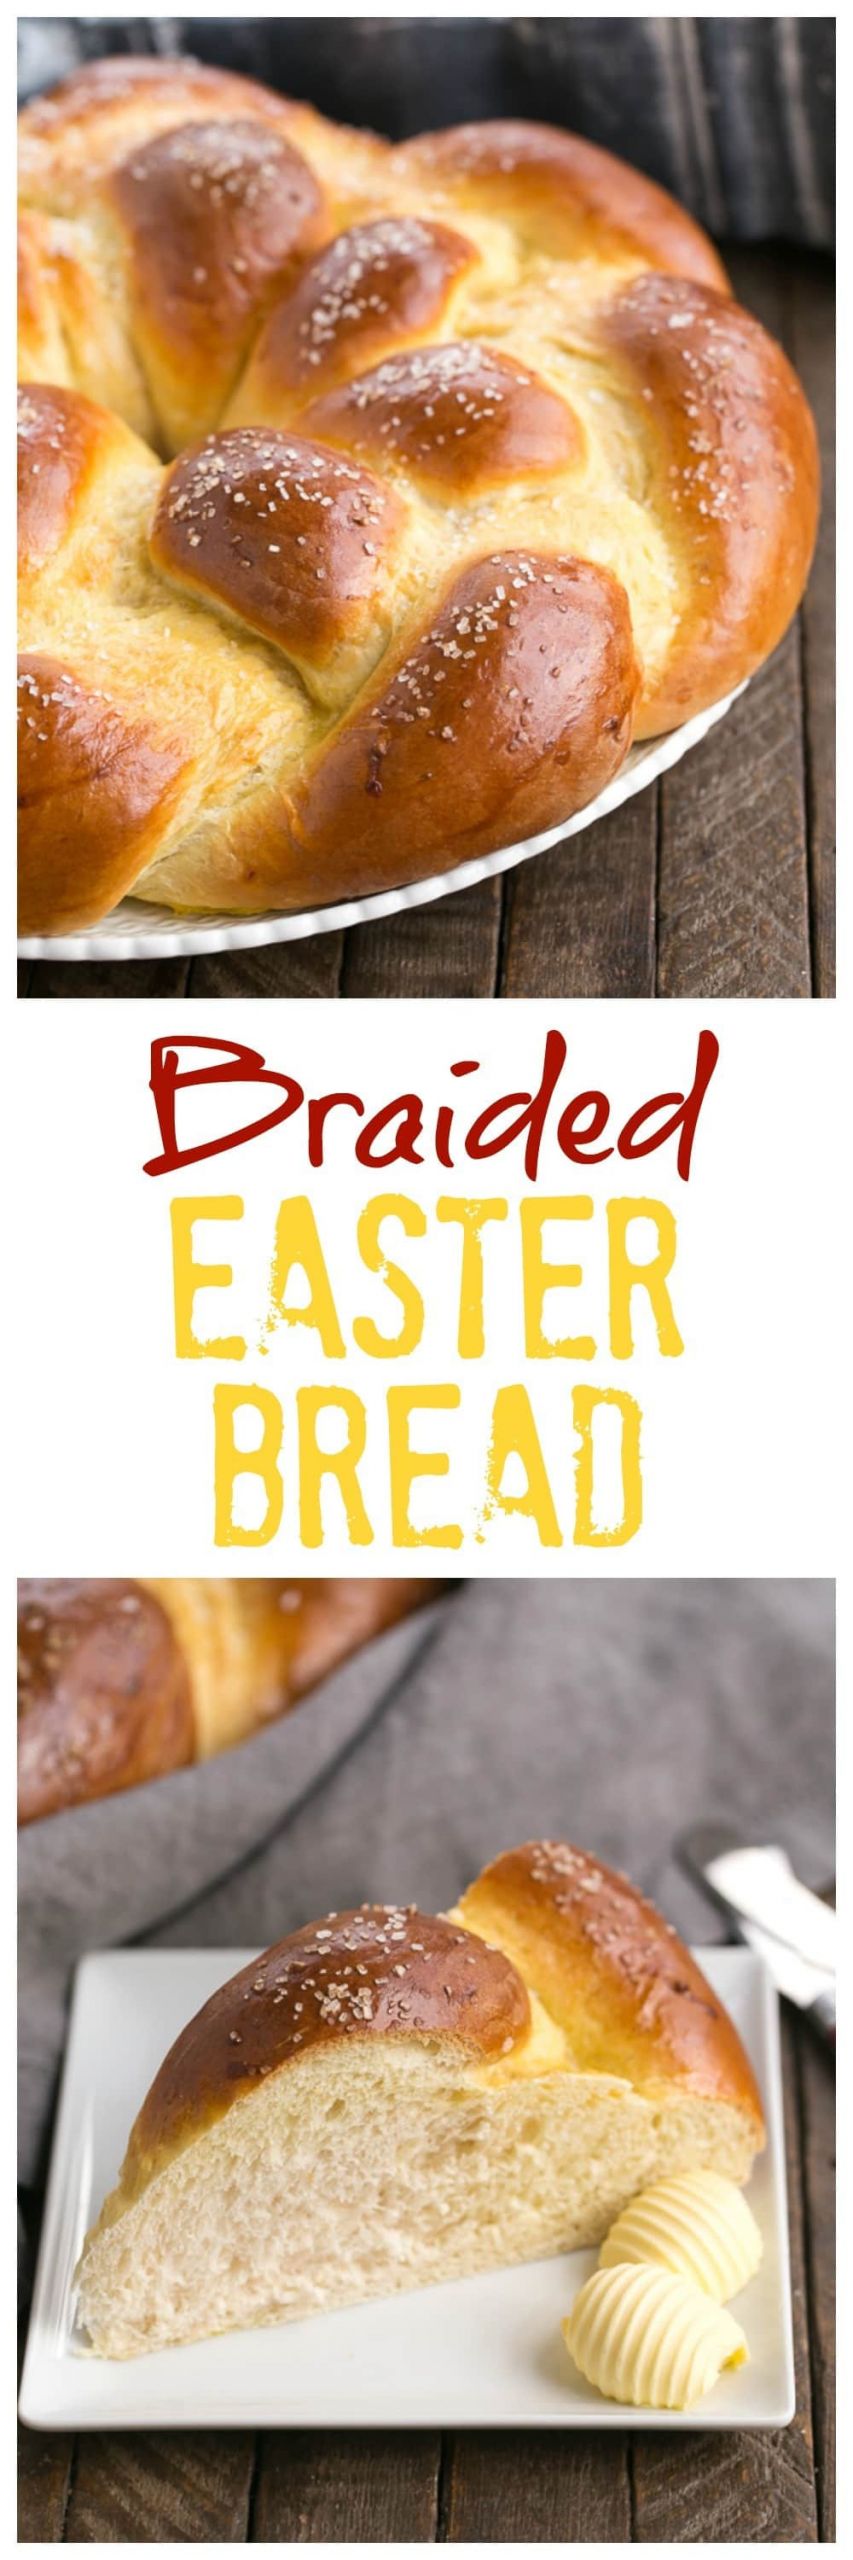 Easter Bread Recipe
 Braided Easter Bread Recipe That Skinny Chick Can Bake